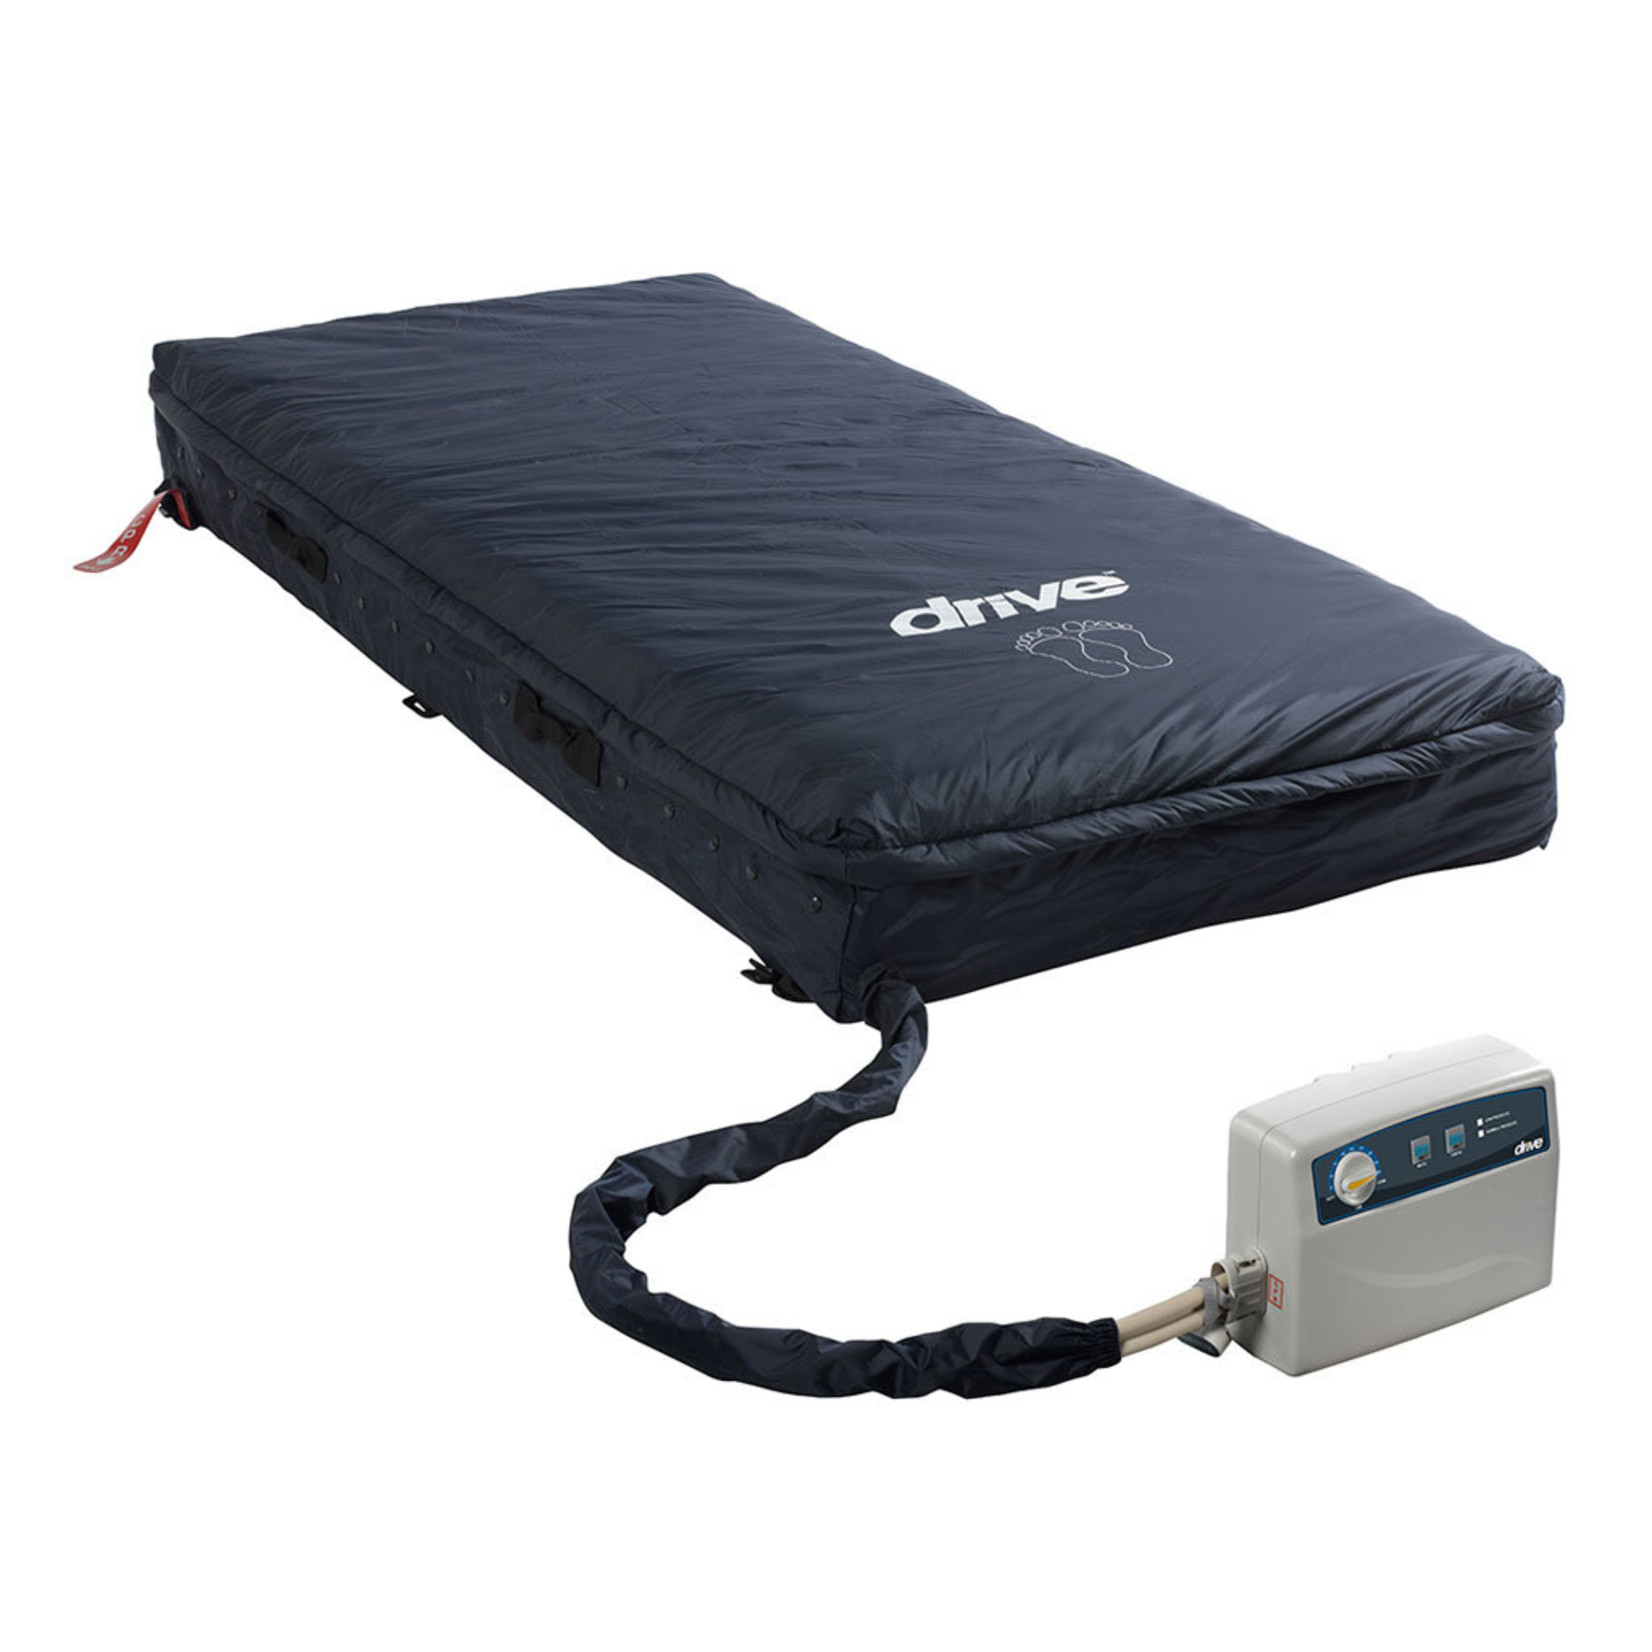 Drive Med-Aire Assure 5" Air + 3" Foam Base Alternating Pressure and Low Air Loss Mattress System